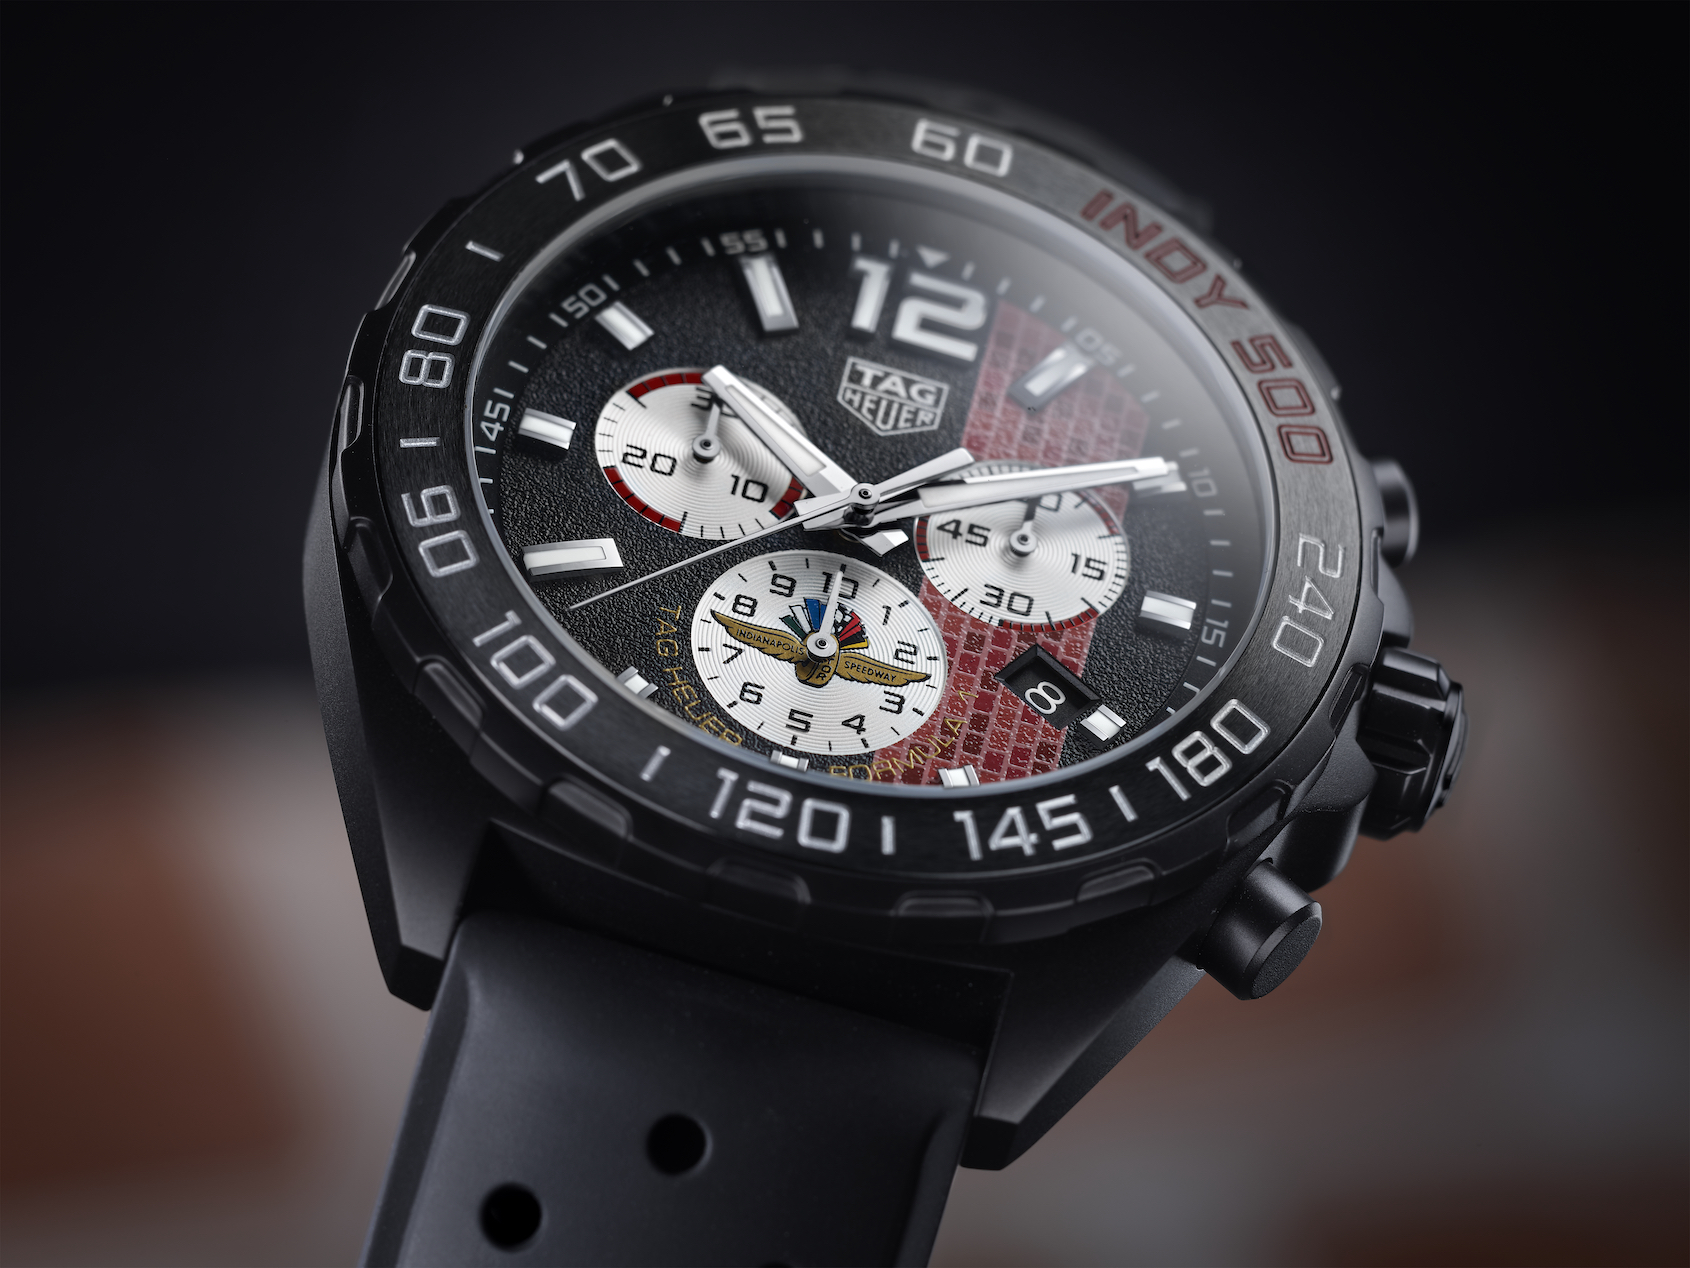 INTRODUCING: The TAG Heuer Formula 1 Indy 500 Special Edition is a circle of blacktop for your wrist